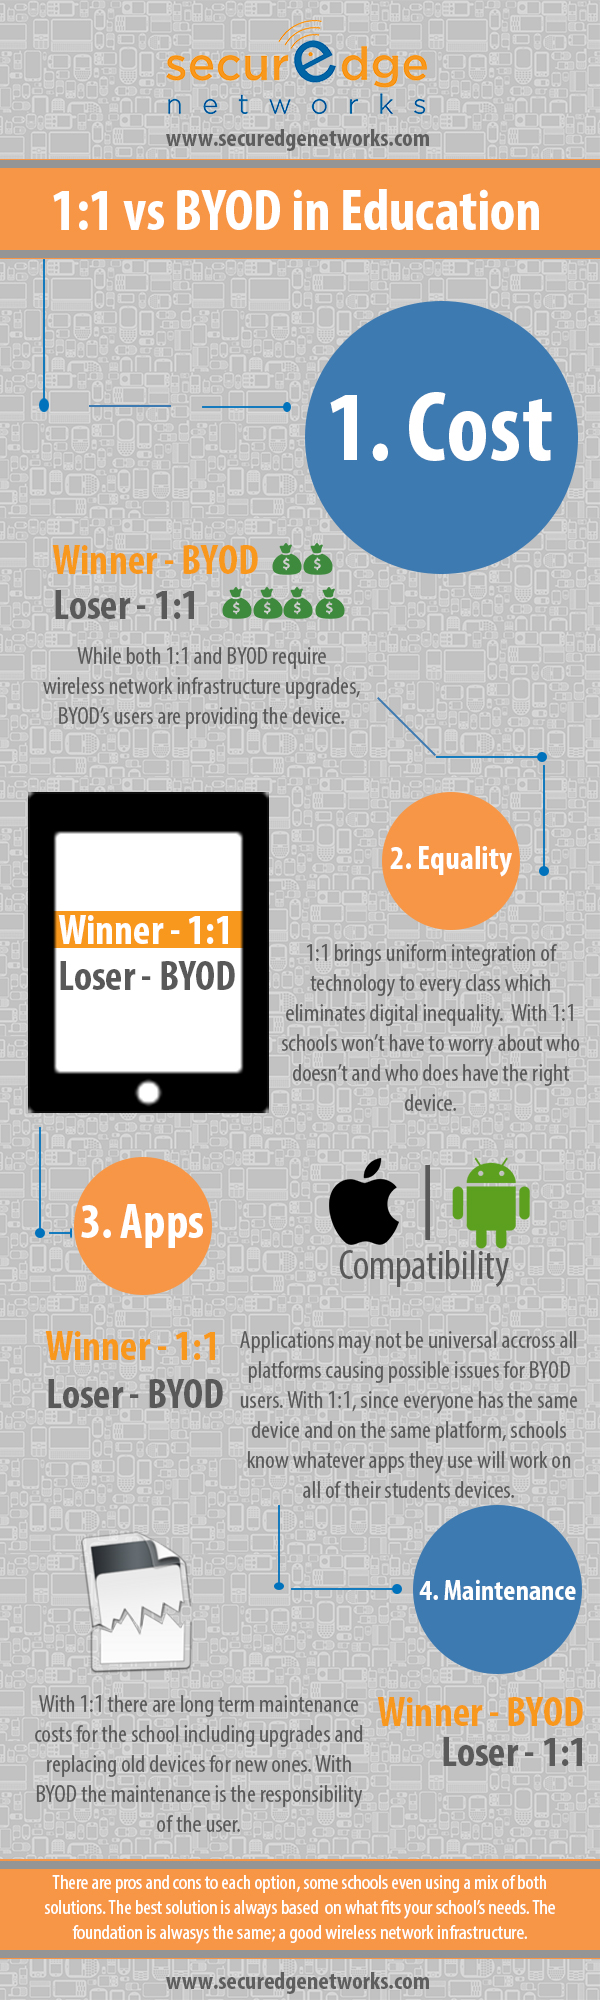 1:1 vs BYOD in education, BYOD solutions, ipads in the classroom, school wireless network